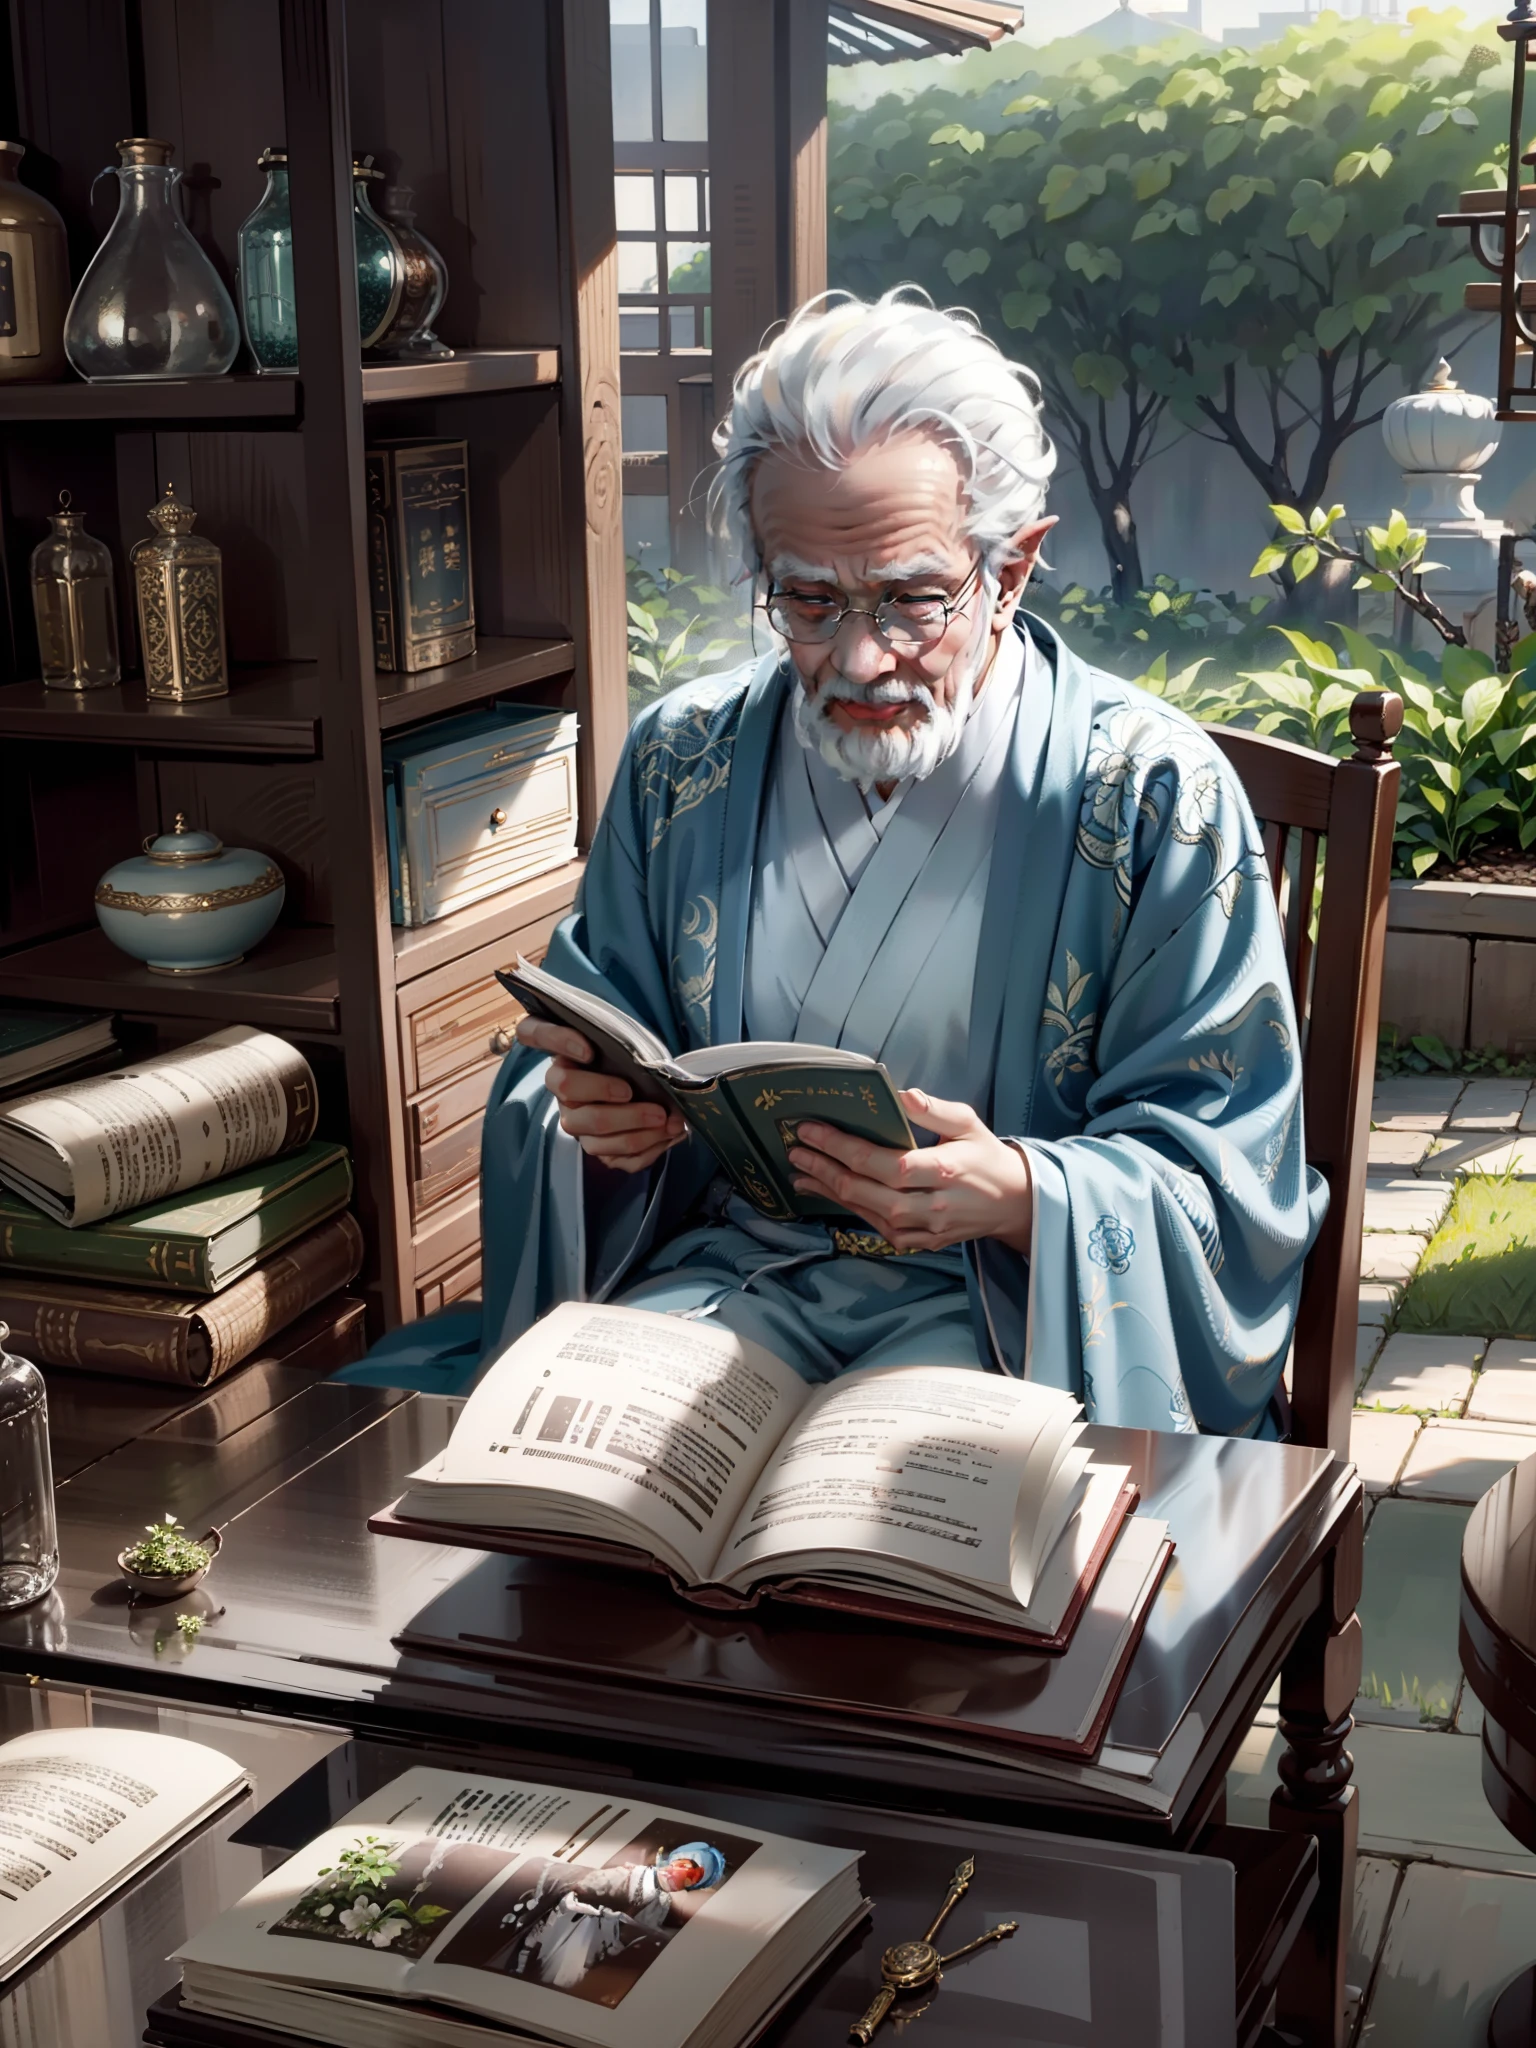 ultraclealigree，Hanfu，Natural light，Kind old man，I am reading medical book research，There are herbs on the ground，The background is landscape